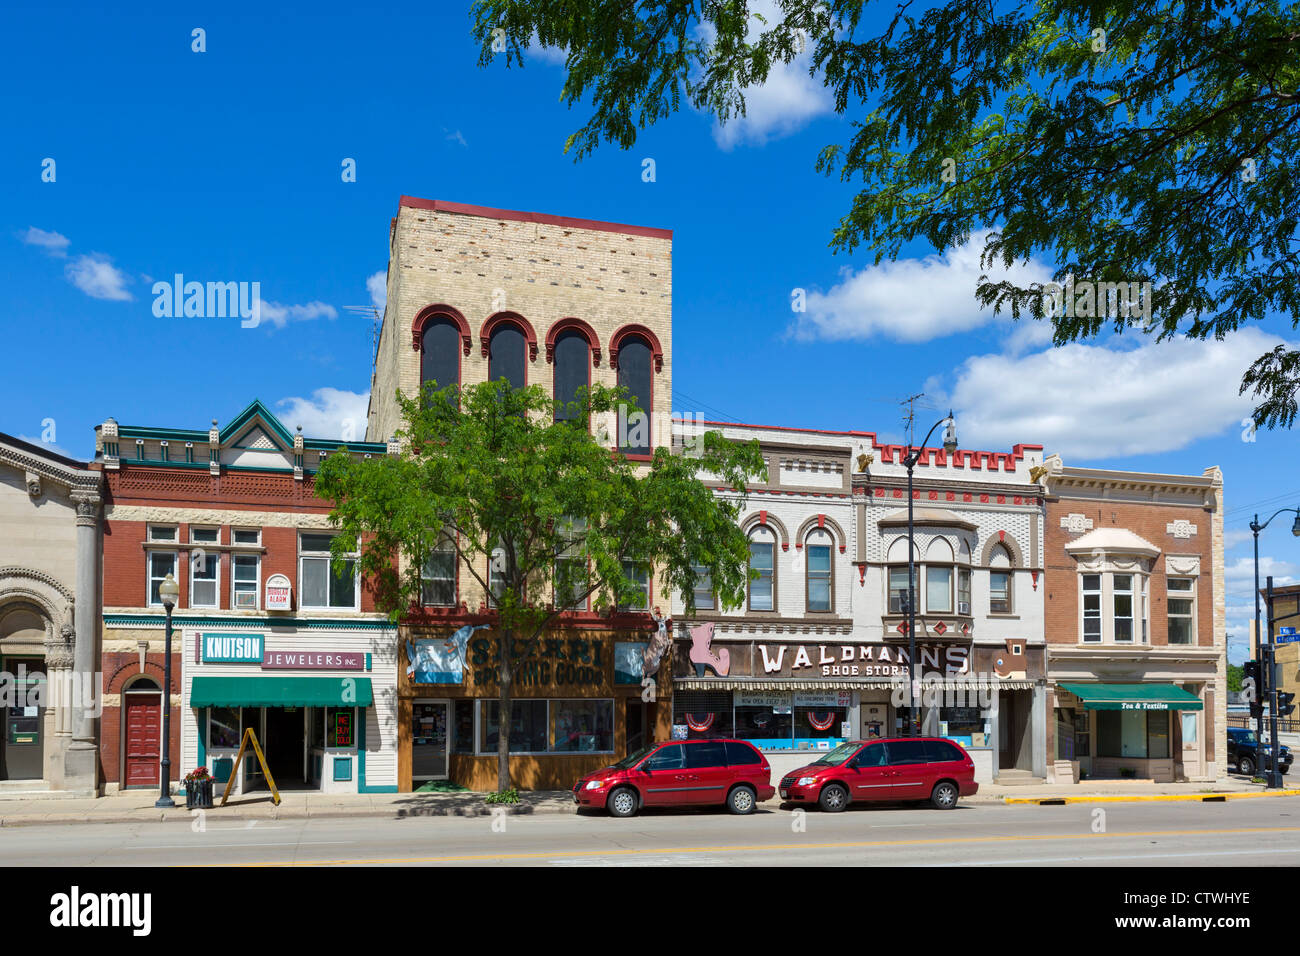 Traditional stores on Main Street in a small US town, Jefferson, Wisconsin, USA Stock Photo